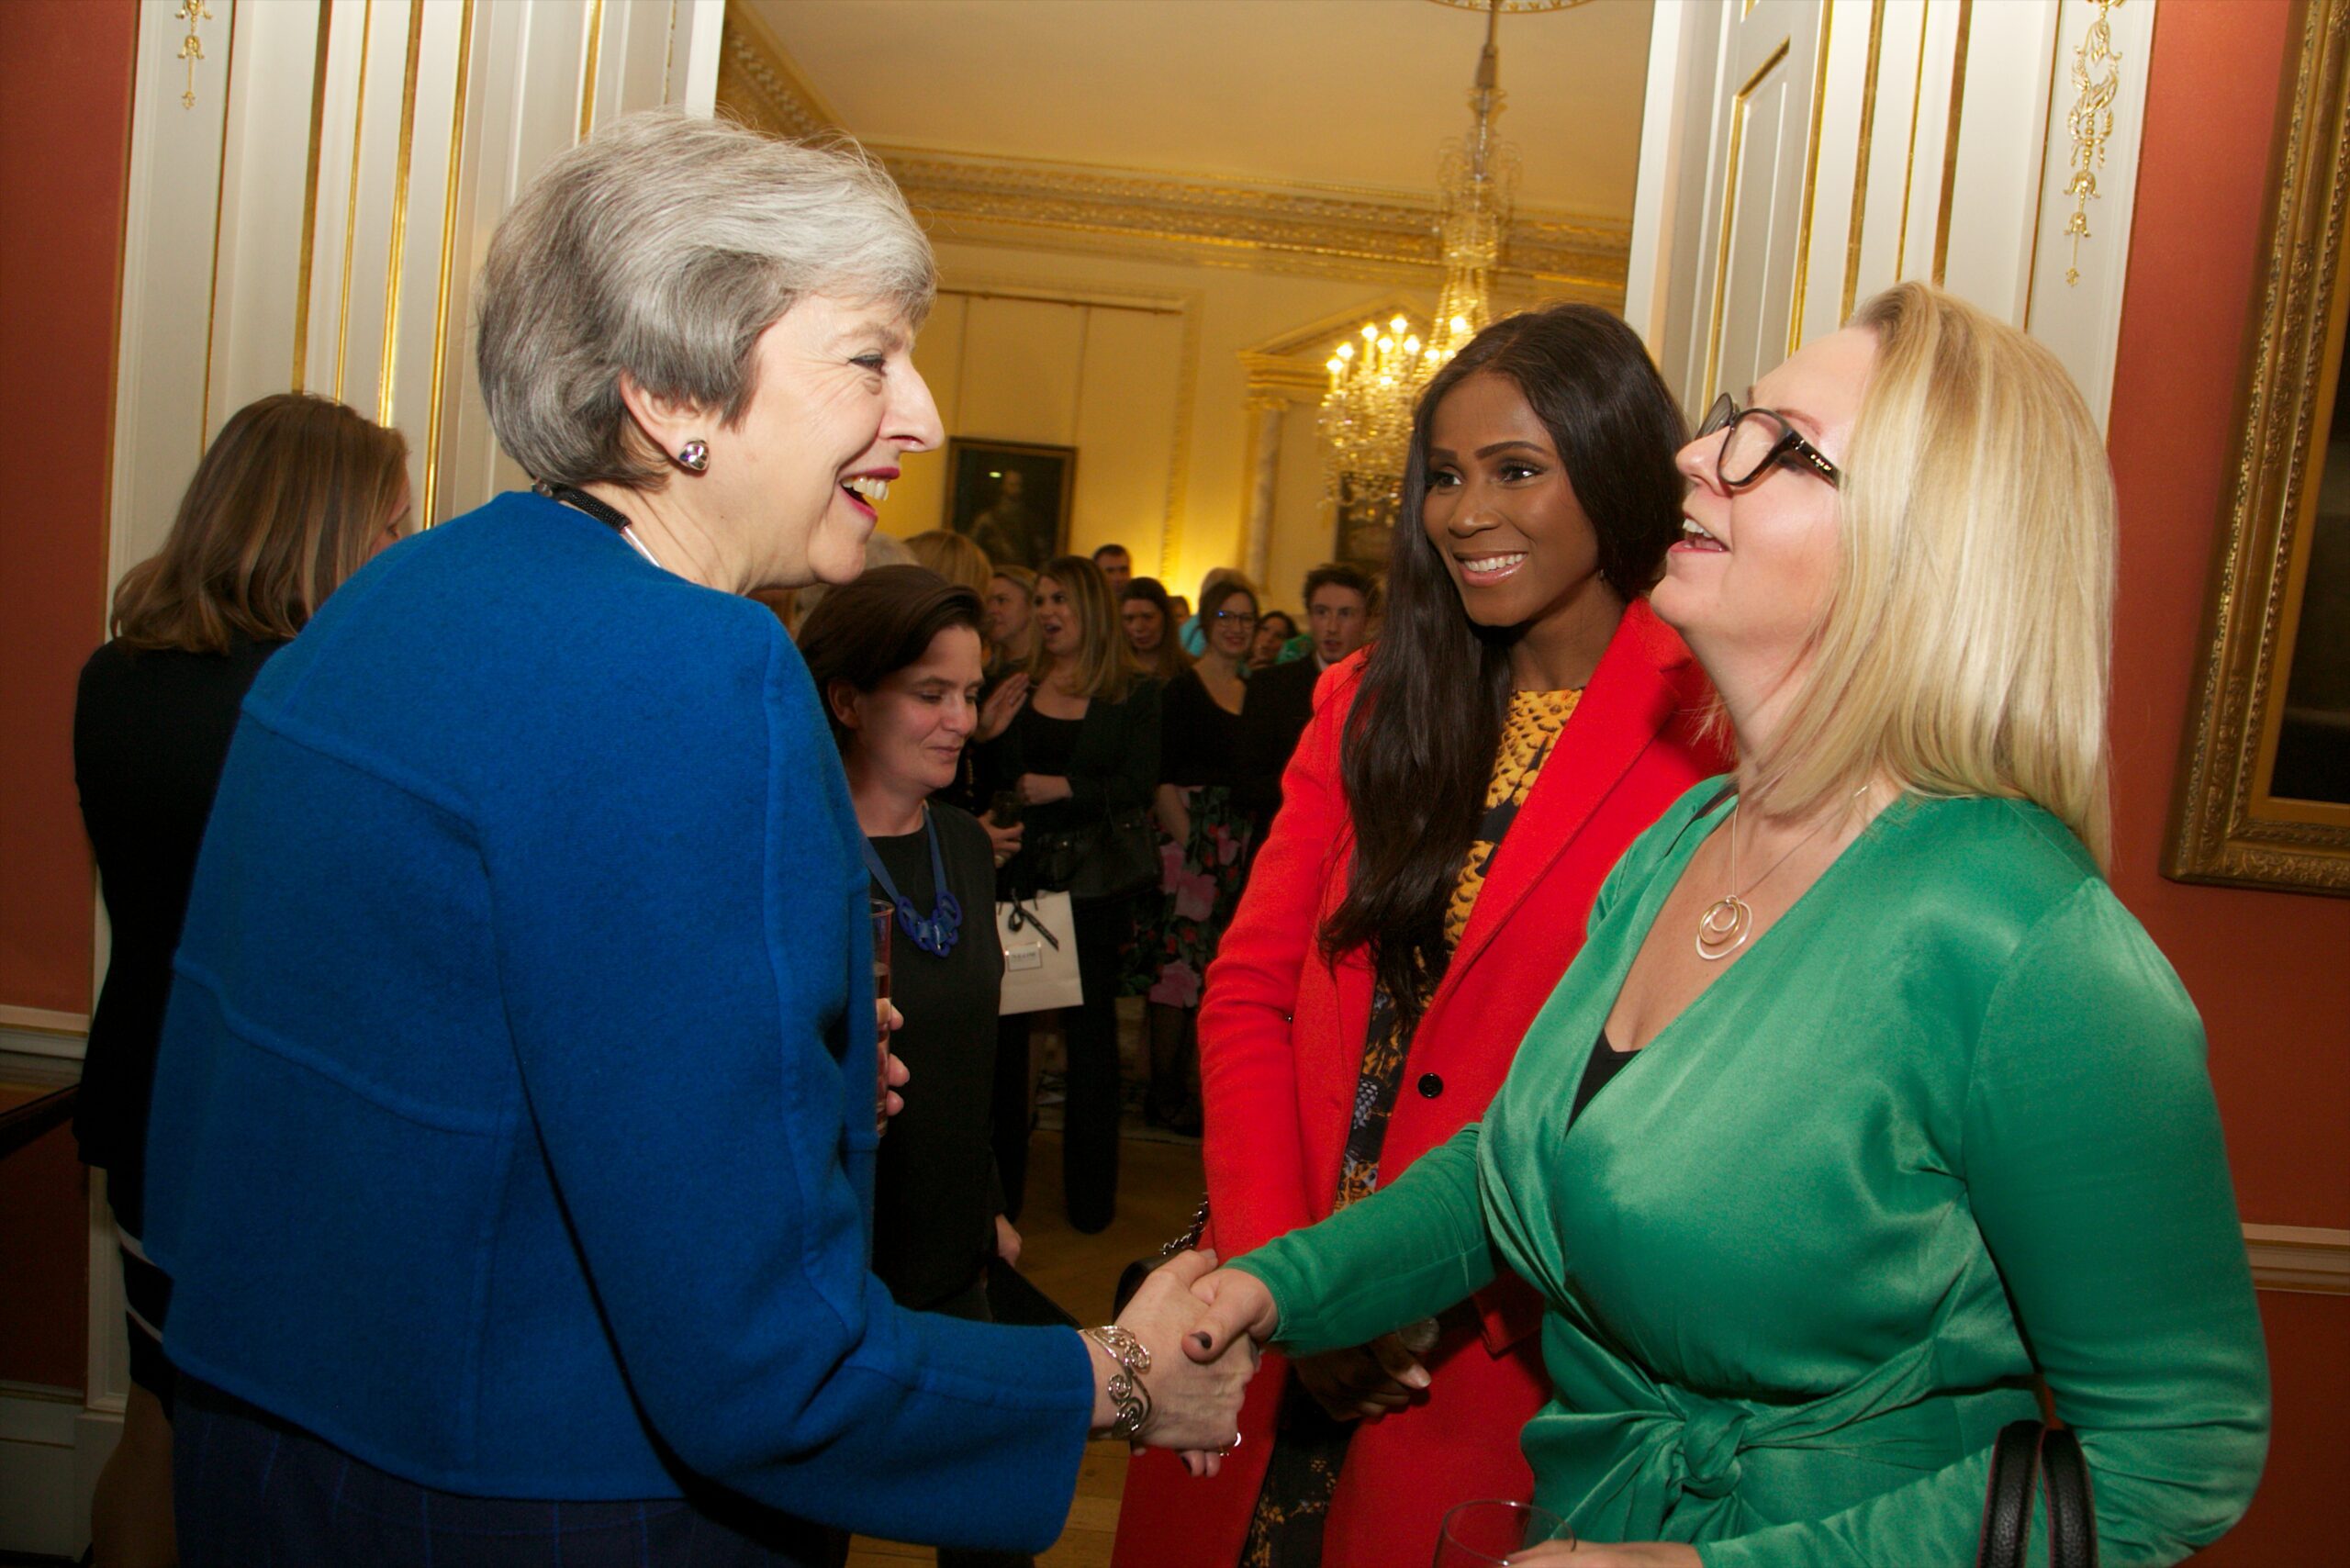 Women In Innovation Award winners meeting former prime minister Theresa May